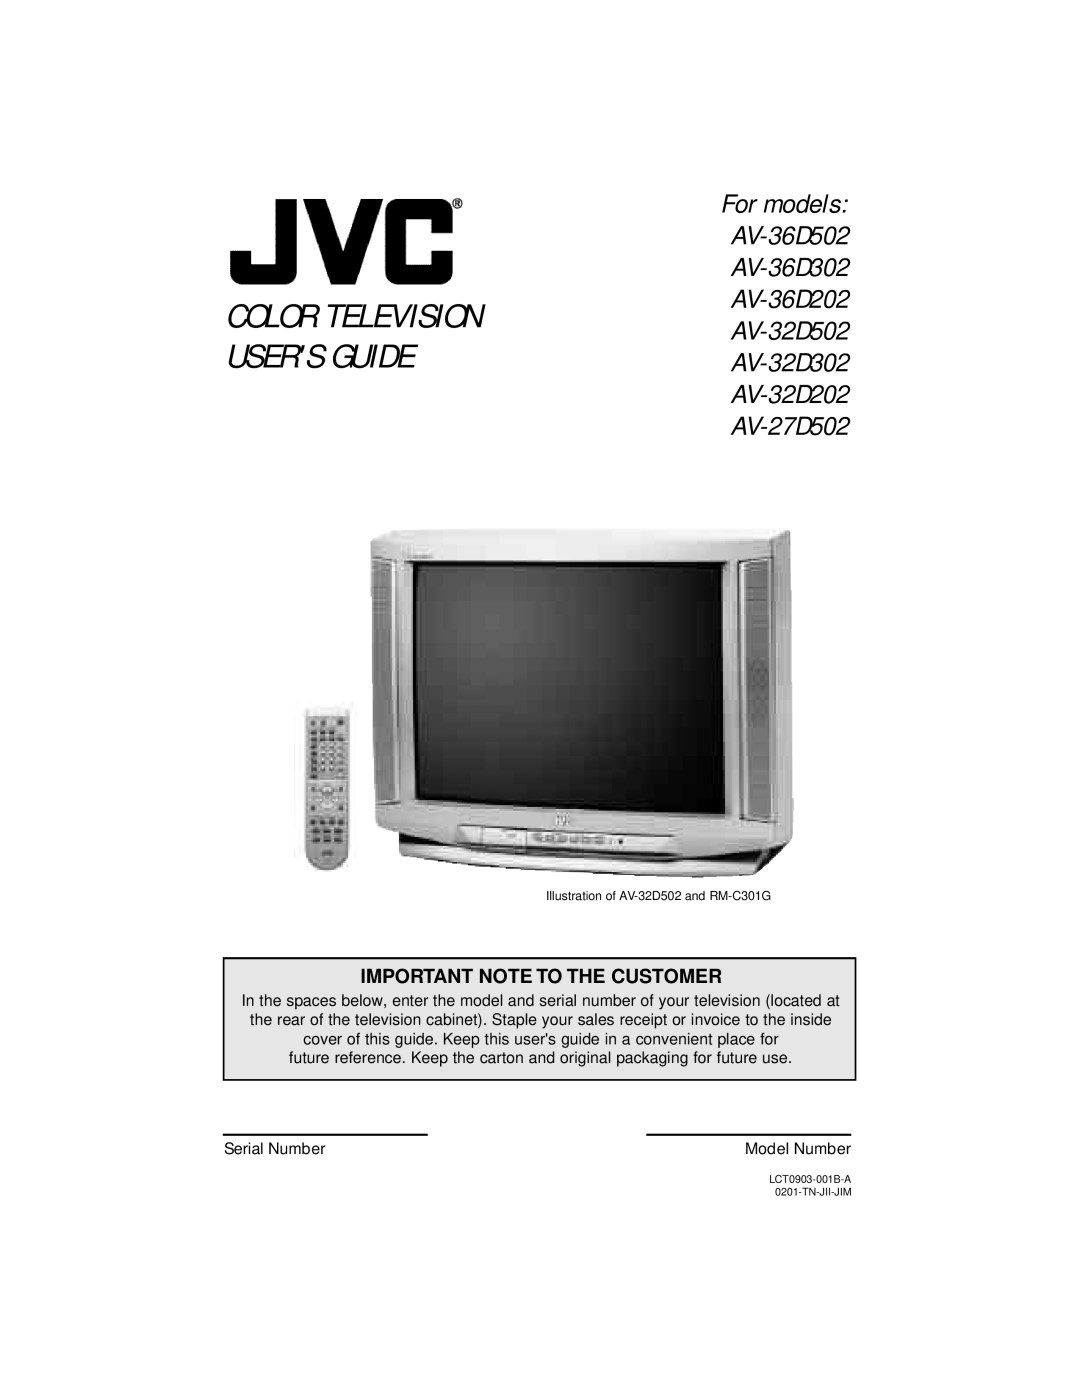 JVC AV 36D502, AV 36D202, AV 36D302, AV 32D302, AV 32D502 manual Color Television Users Guide, Important Note To The Customer 